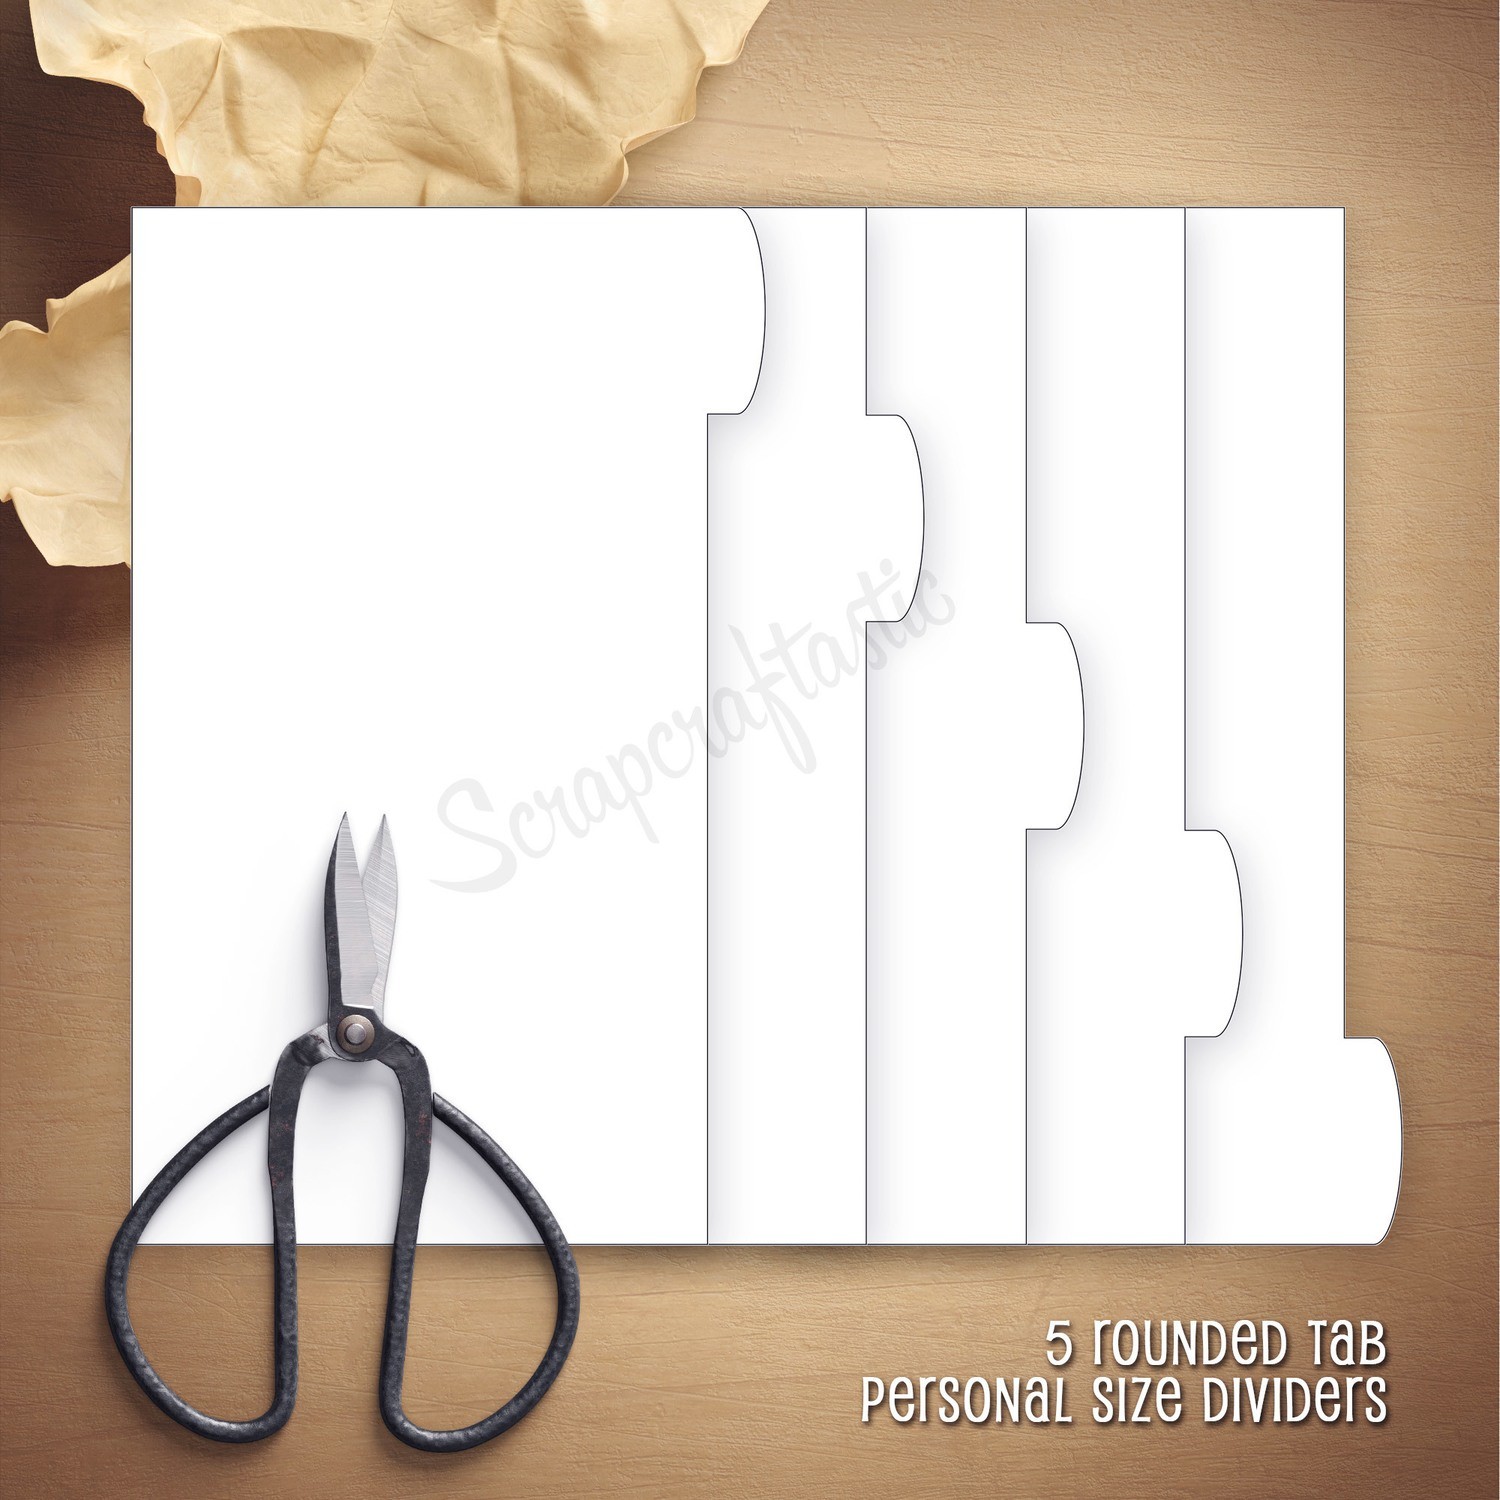 PERSONAL RINGS - 5 Rounded Tab Divider Printable Templates and Cut Files